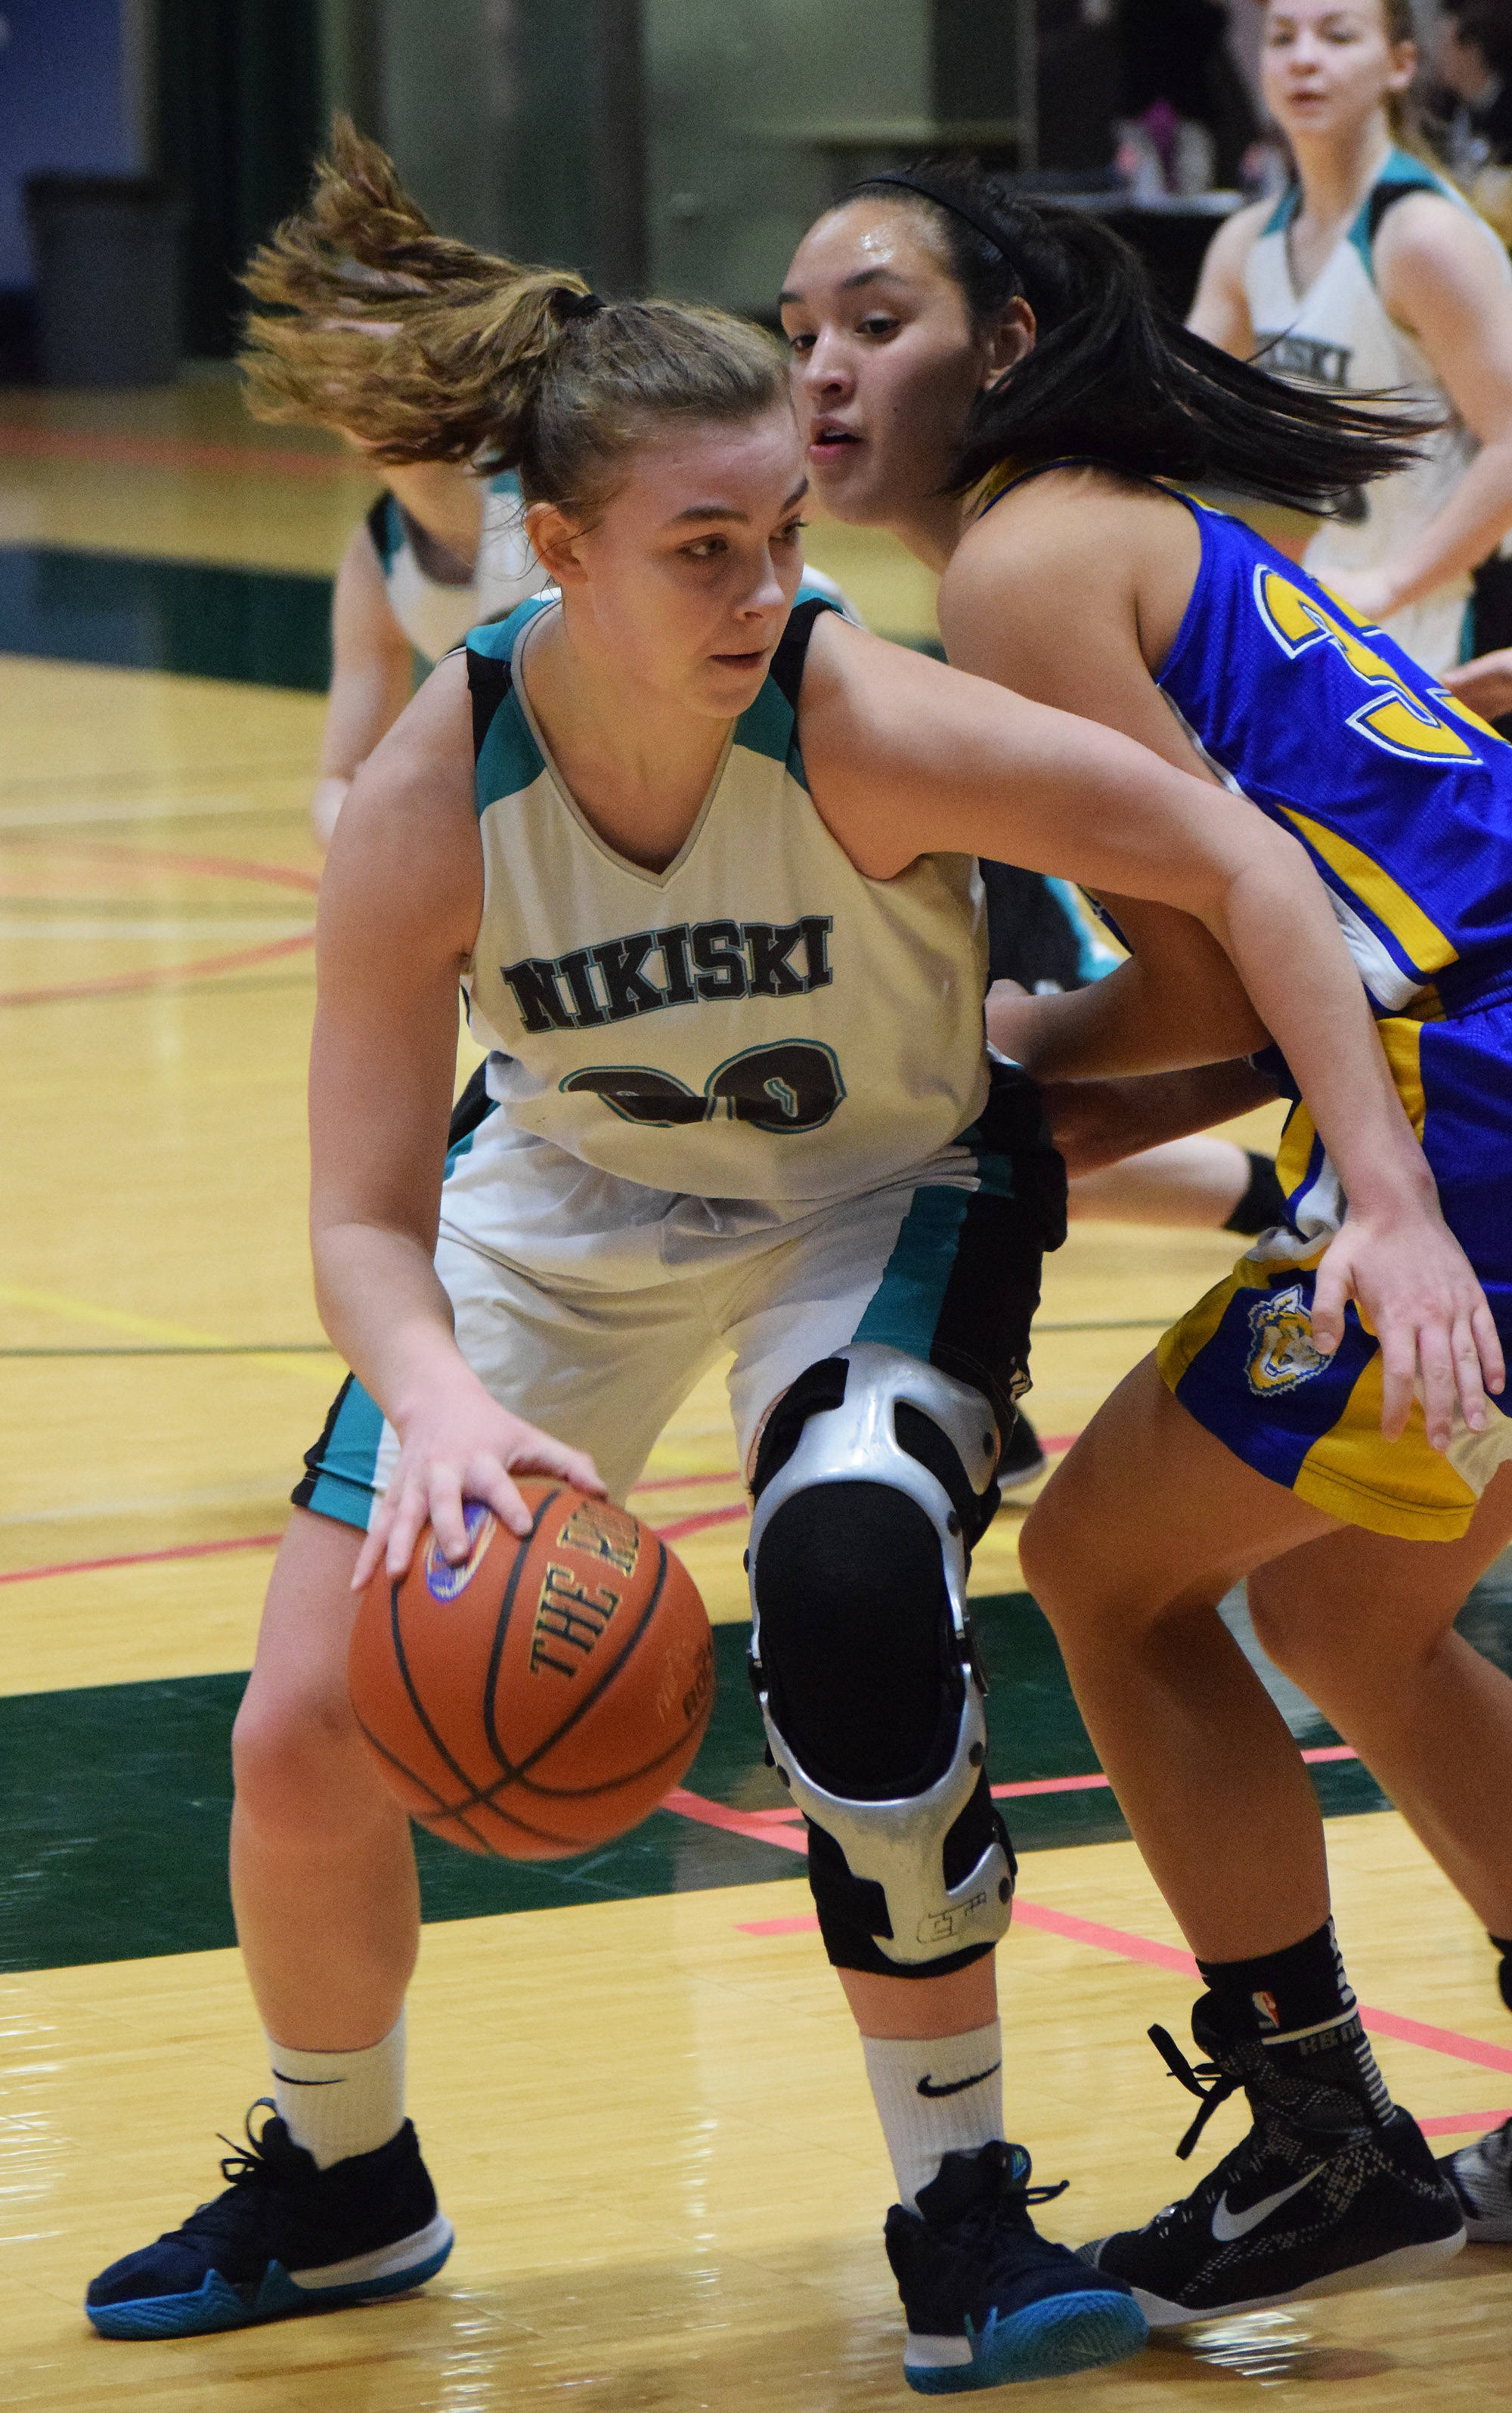 Nikiski’s Bethany Carstens makes a move around Kotzebue’s Alanna Conwell Friday at the Class 3A state tournament at the Alaska Airlines Center. (Photo by Joey Klecka/Peninsula Clarion)